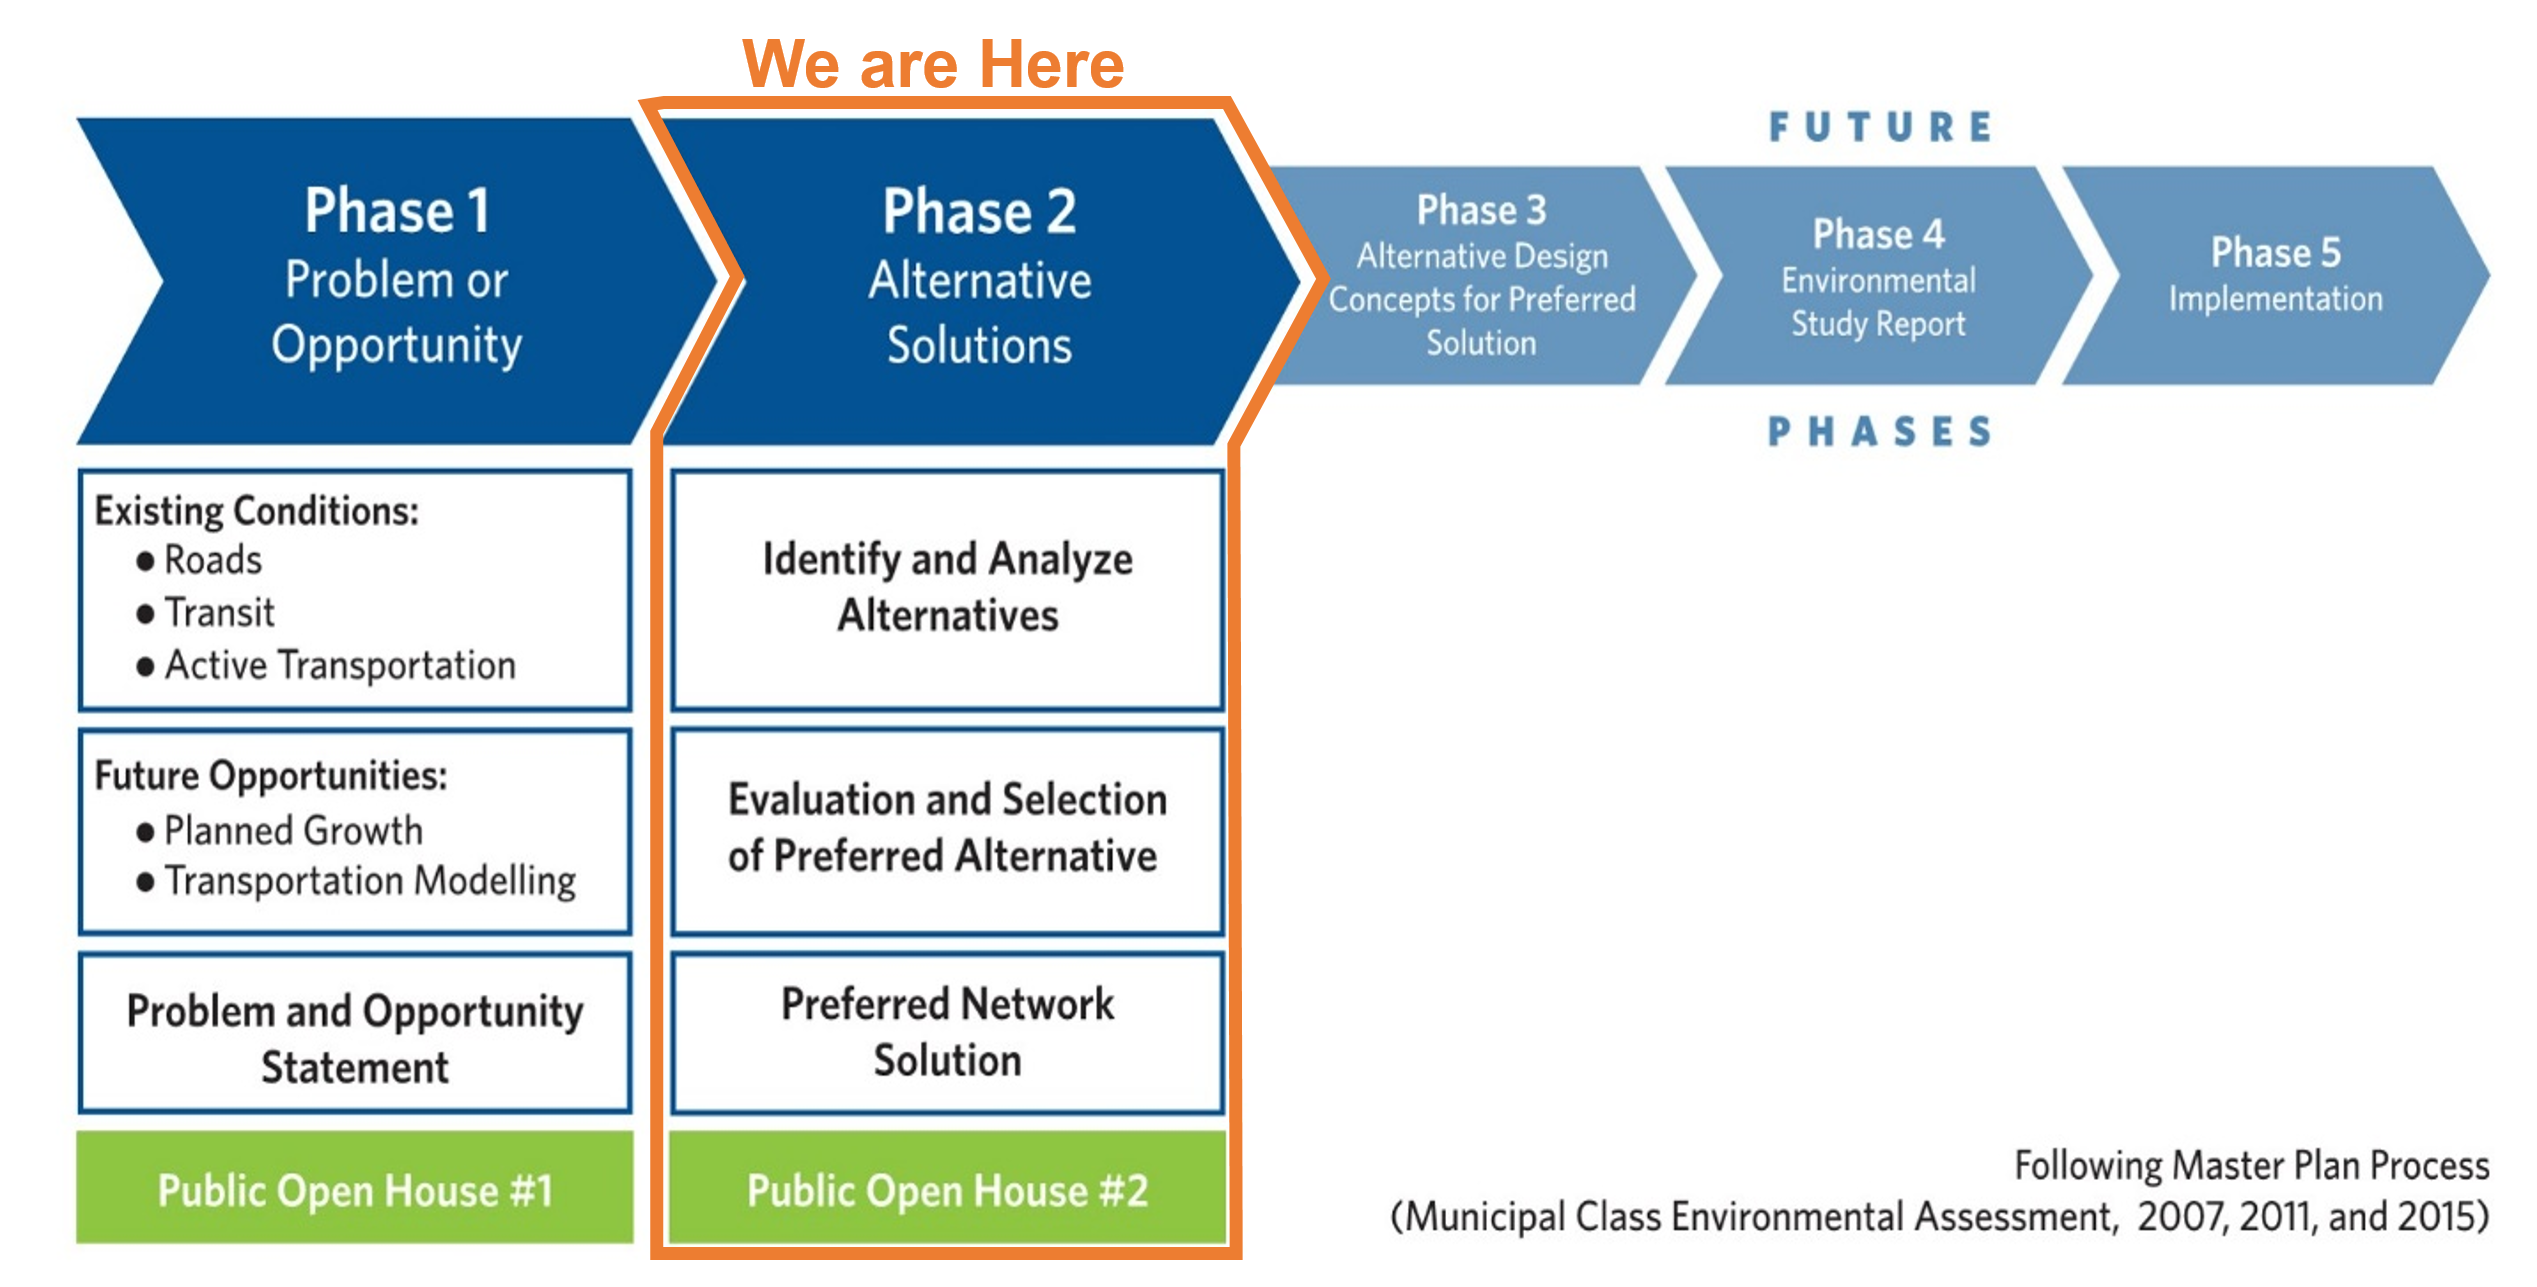 The TMP Study is following Phase 1 and 2 of the Environmental Assessment. This Study is currently in Phase 2, Alternative Solutions, where we identify and analyze alternatives, evaluate and select the preferred alternative, and confirm the preferred network solution.